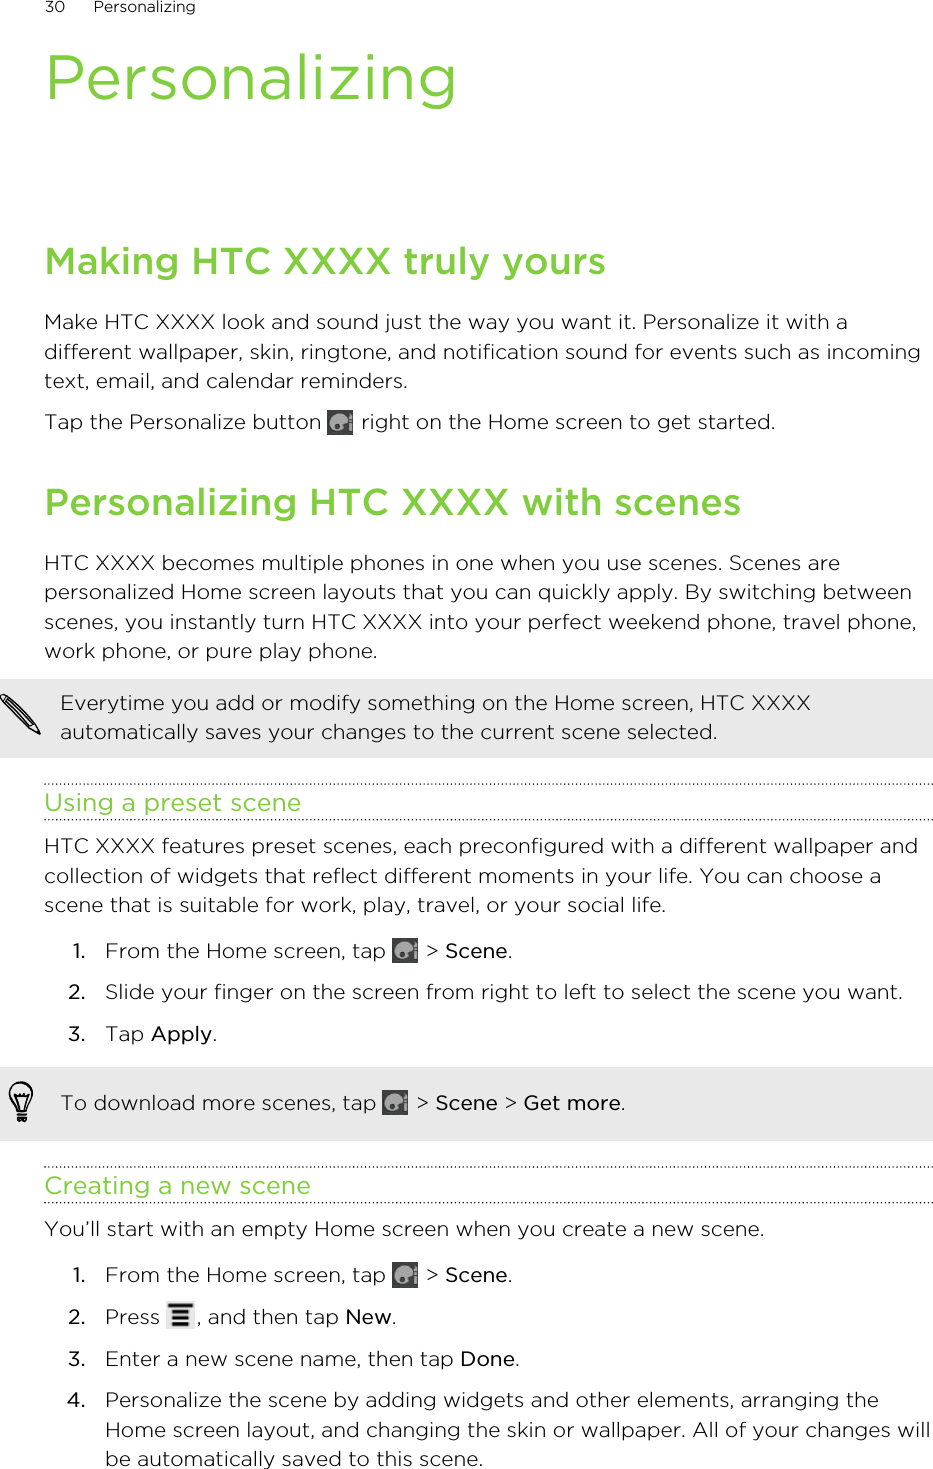 PersonalizingMaking HTC XXXX truly yoursMake HTC XXXX look and sound just the way you want it. Personalize it with adifferent wallpaper, skin, ringtone, and notification sound for events such as incomingtext, email, and calendar reminders.Tap the Personalize button   right on the Home screen to get started.Personalizing HTC XXXX with scenesHTC XXXX becomes multiple phones in one when you use scenes. Scenes arepersonalized Home screen layouts that you can quickly apply. By switching betweenscenes, you instantly turn HTC XXXX into your perfect weekend phone, travel phone,work phone, or pure play phone.Everytime you add or modify something on the Home screen, HTC XXXXautomatically saves your changes to the current scene selected.Using a preset sceneHTC XXXX features preset scenes, each preconfigured with a different wallpaper andcollection of widgets that reflect different moments in your life. You can choose ascene that is suitable for work, play, travel, or your social life.1. From the Home screen, tap   &gt; Scene.2. Slide your finger on the screen from right to left to select the scene you want.3. Tap Apply.To download more scenes, tap   &gt; Scene &gt; Get more.Creating a new sceneYou’ll start with an empty Home screen when you create a new scene.1. From the Home screen, tap   &gt; Scene.2. Press  , and then tap New.3. Enter a new scene name, then tap Done.4. Personalize the scene by adding widgets and other elements, arranging theHome screen layout, and changing the skin or wallpaper. All of your changes willbe automatically saved to this scene.30 Personalizing